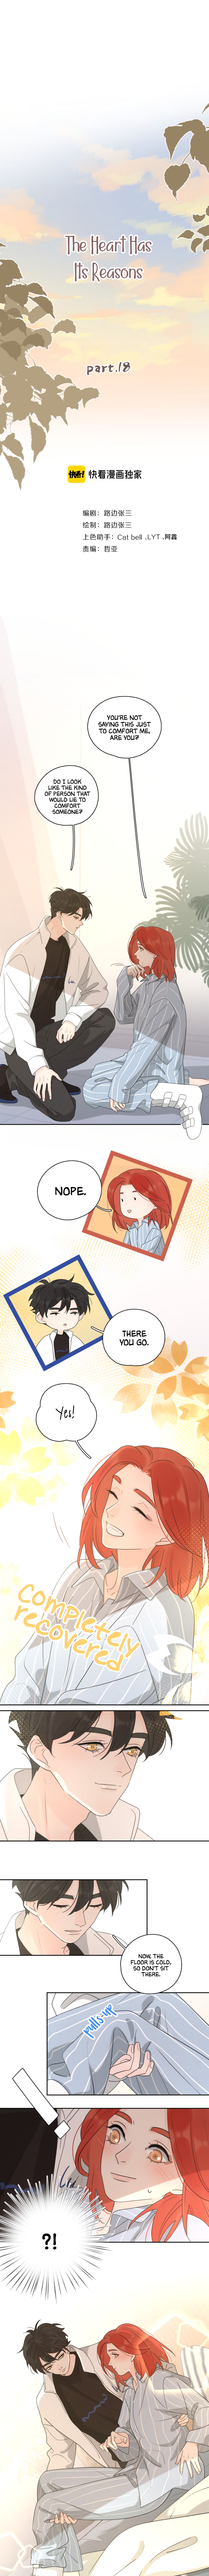 The Looks Of Love: The Heart Has Its Reasons Chapter 58 - Vol. 2 Ch. 18 - An Uncontrollable Fluttering - Picture 1